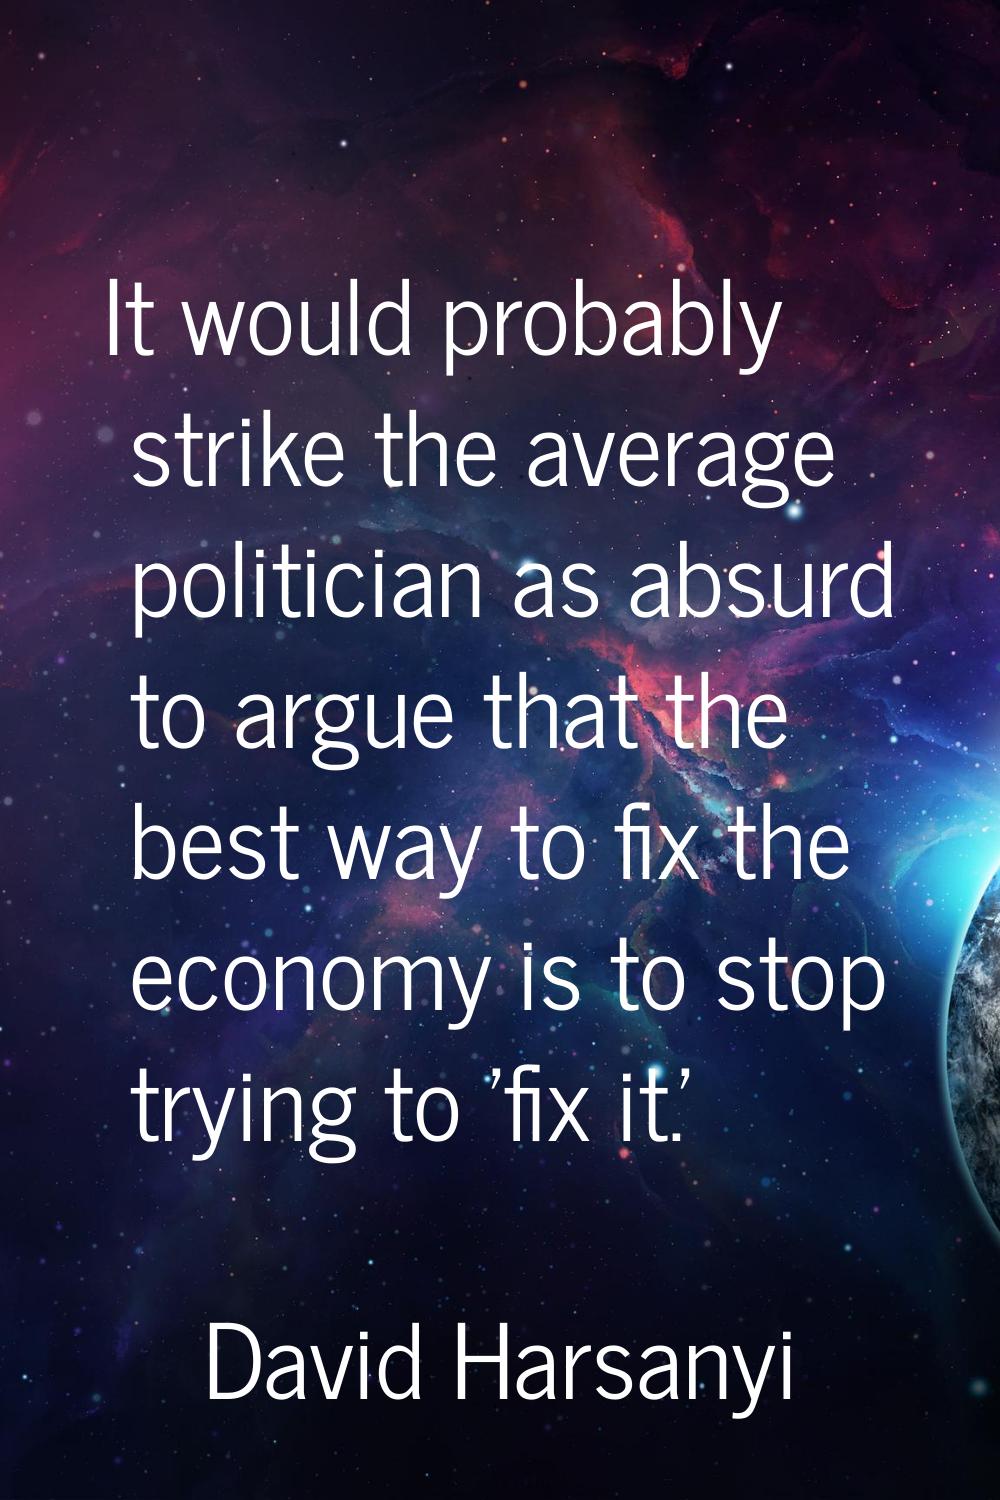 It would probably strike the average politician as absurd to argue that the best way to fix the eco